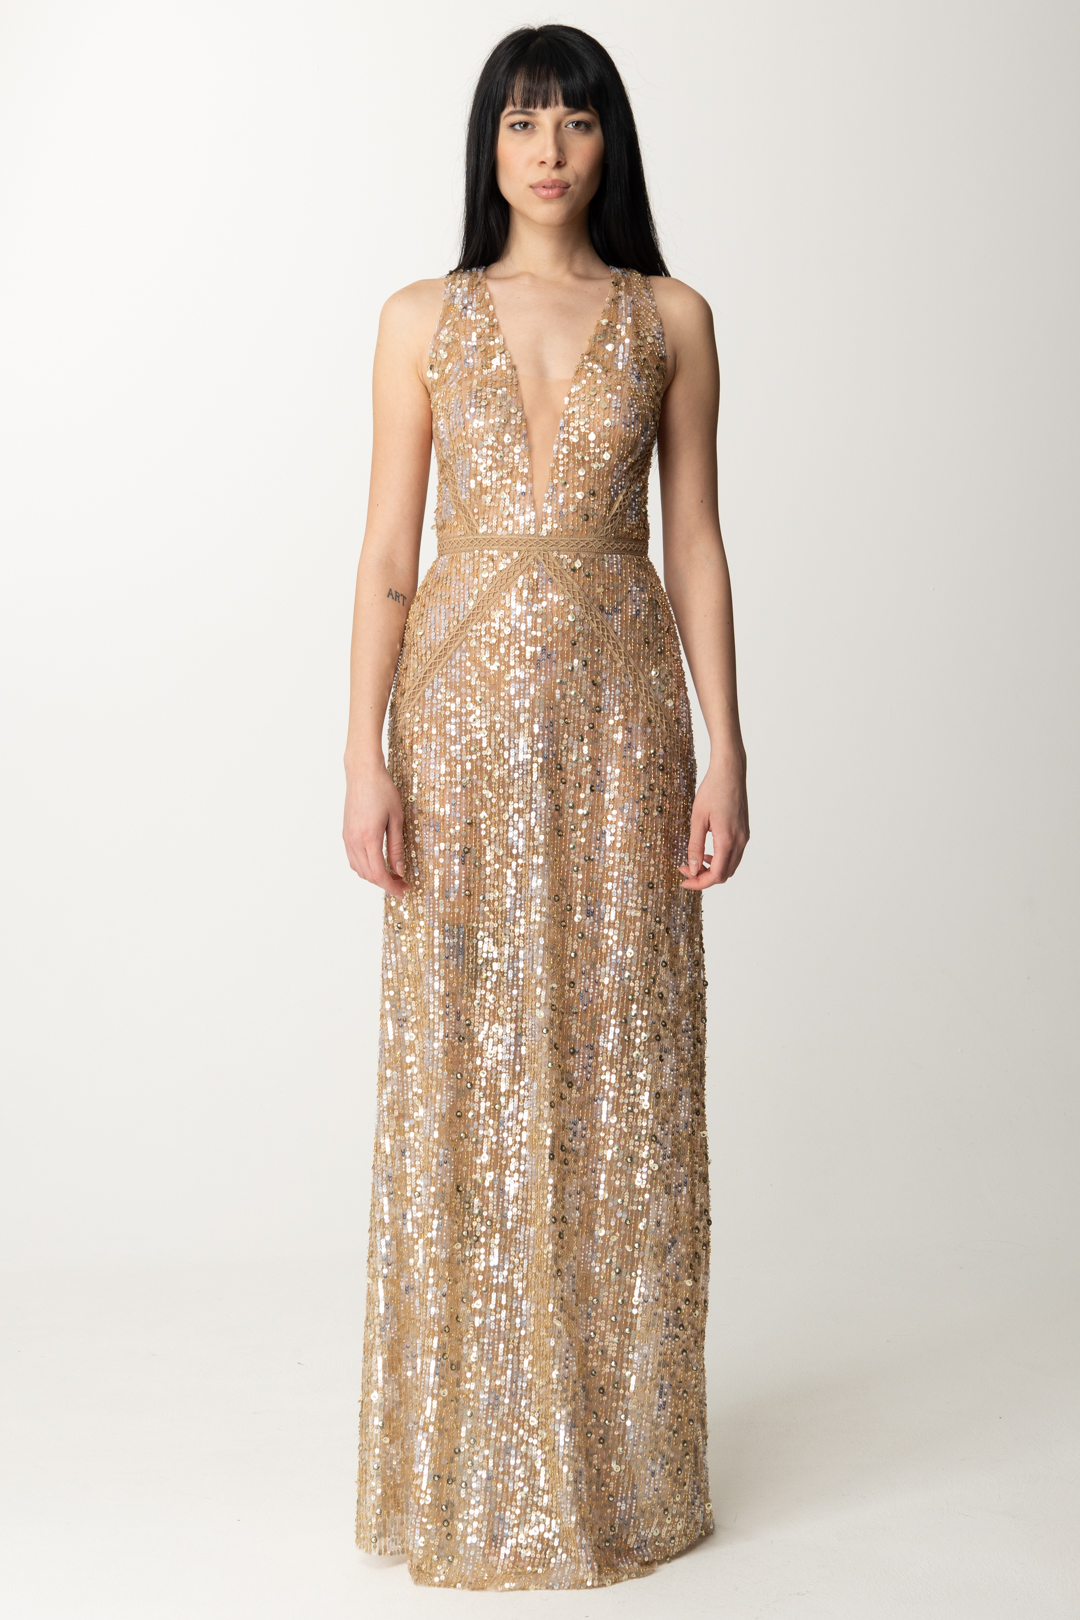 Preview: Elisabetta Franchi Red Carpet Full Sequin Dress with Cutout Embroidery Oro